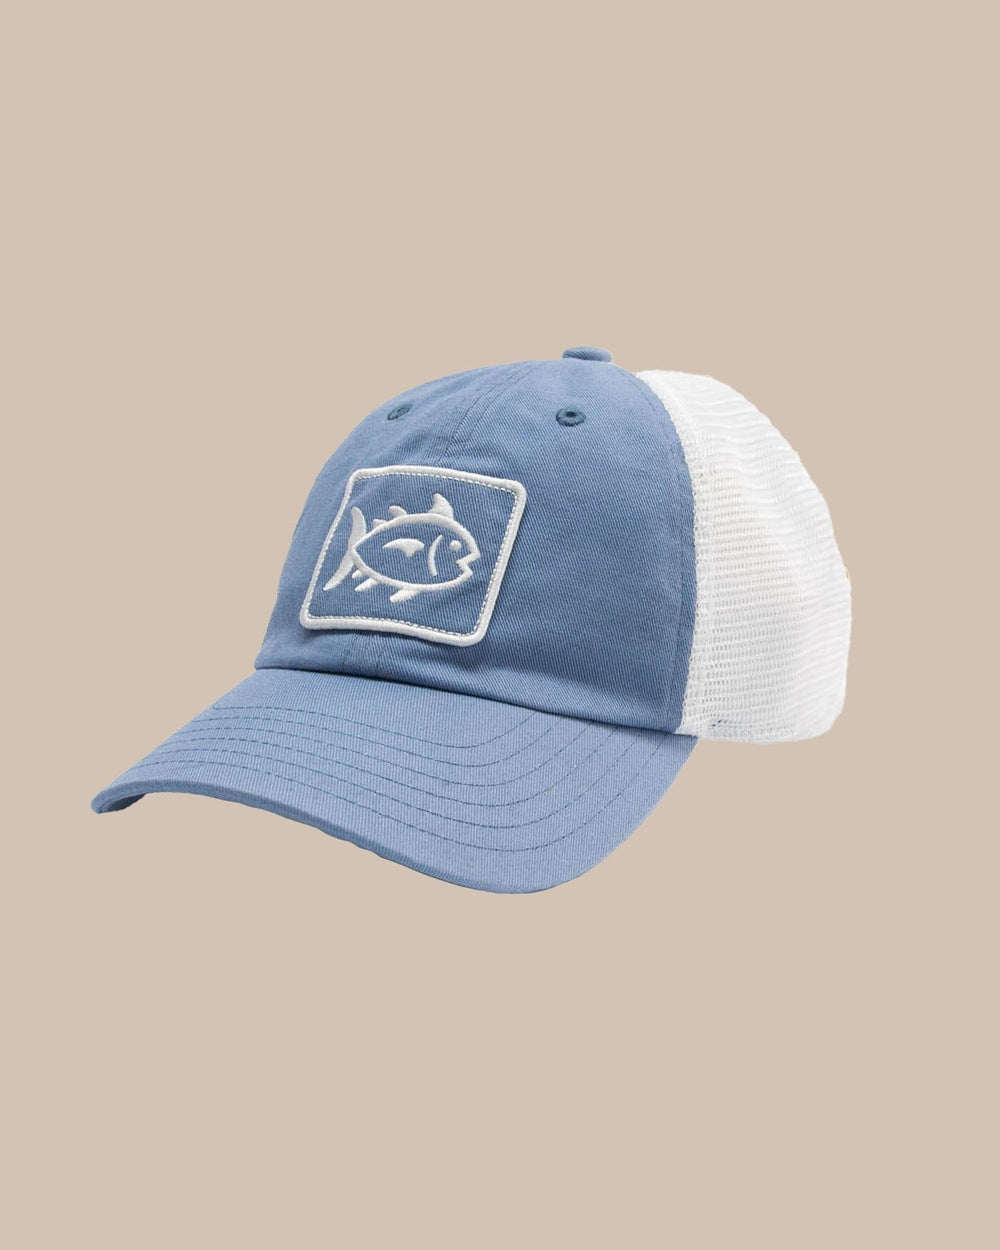 The front view of the Southern Tide Sun Farer Skipjack Fly Patch Trucker Hat by Southern Tide - Subdued Blue